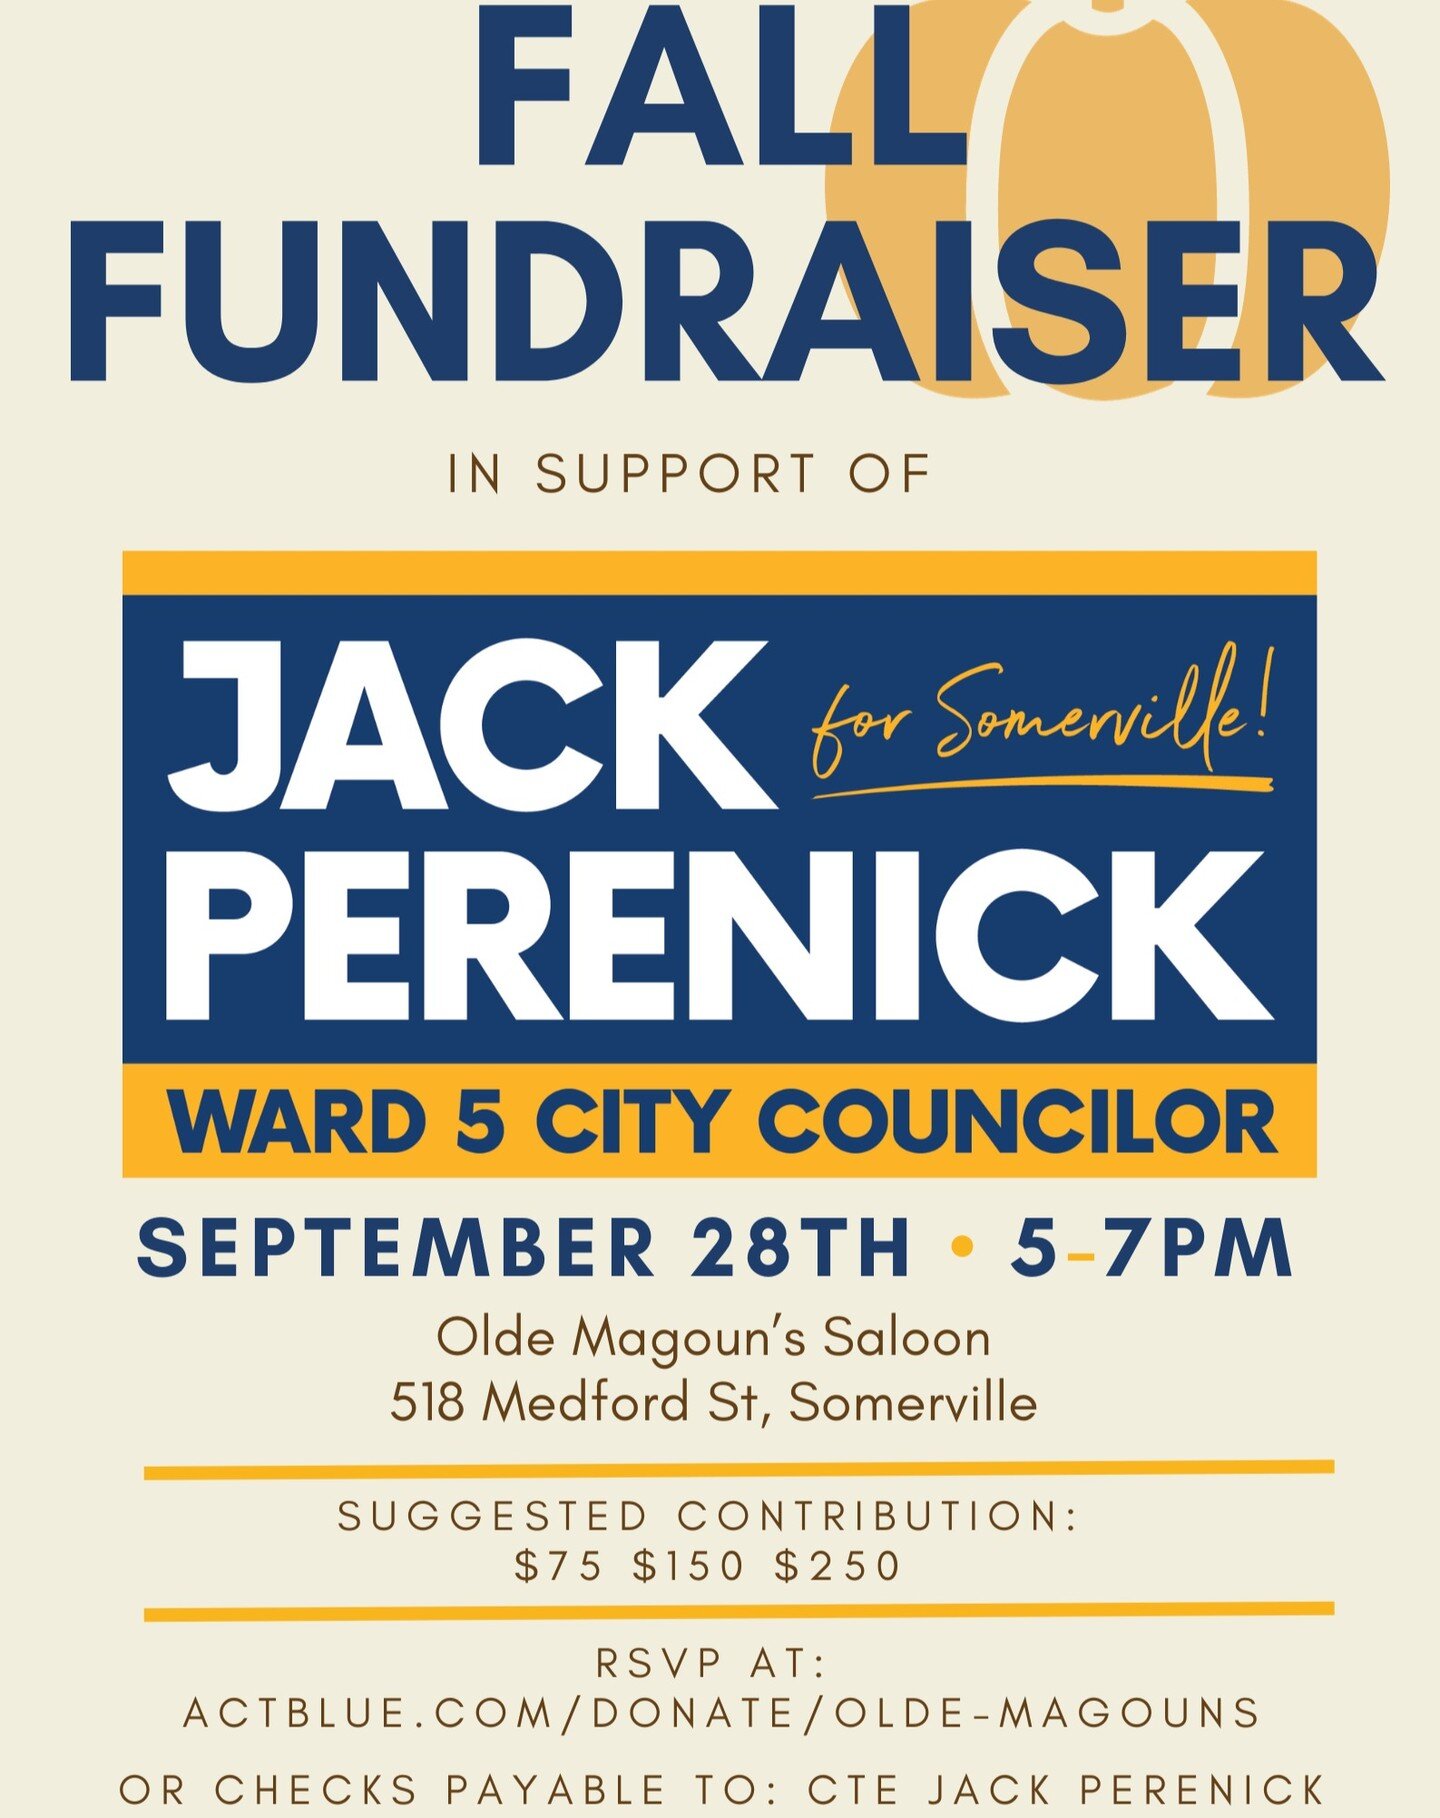 Come join us TONIGHT at Magoun's Saloon from 5-7pm! Enjoy some free food with friends, neighbors, and supporters of Jack! Link to register in bio!